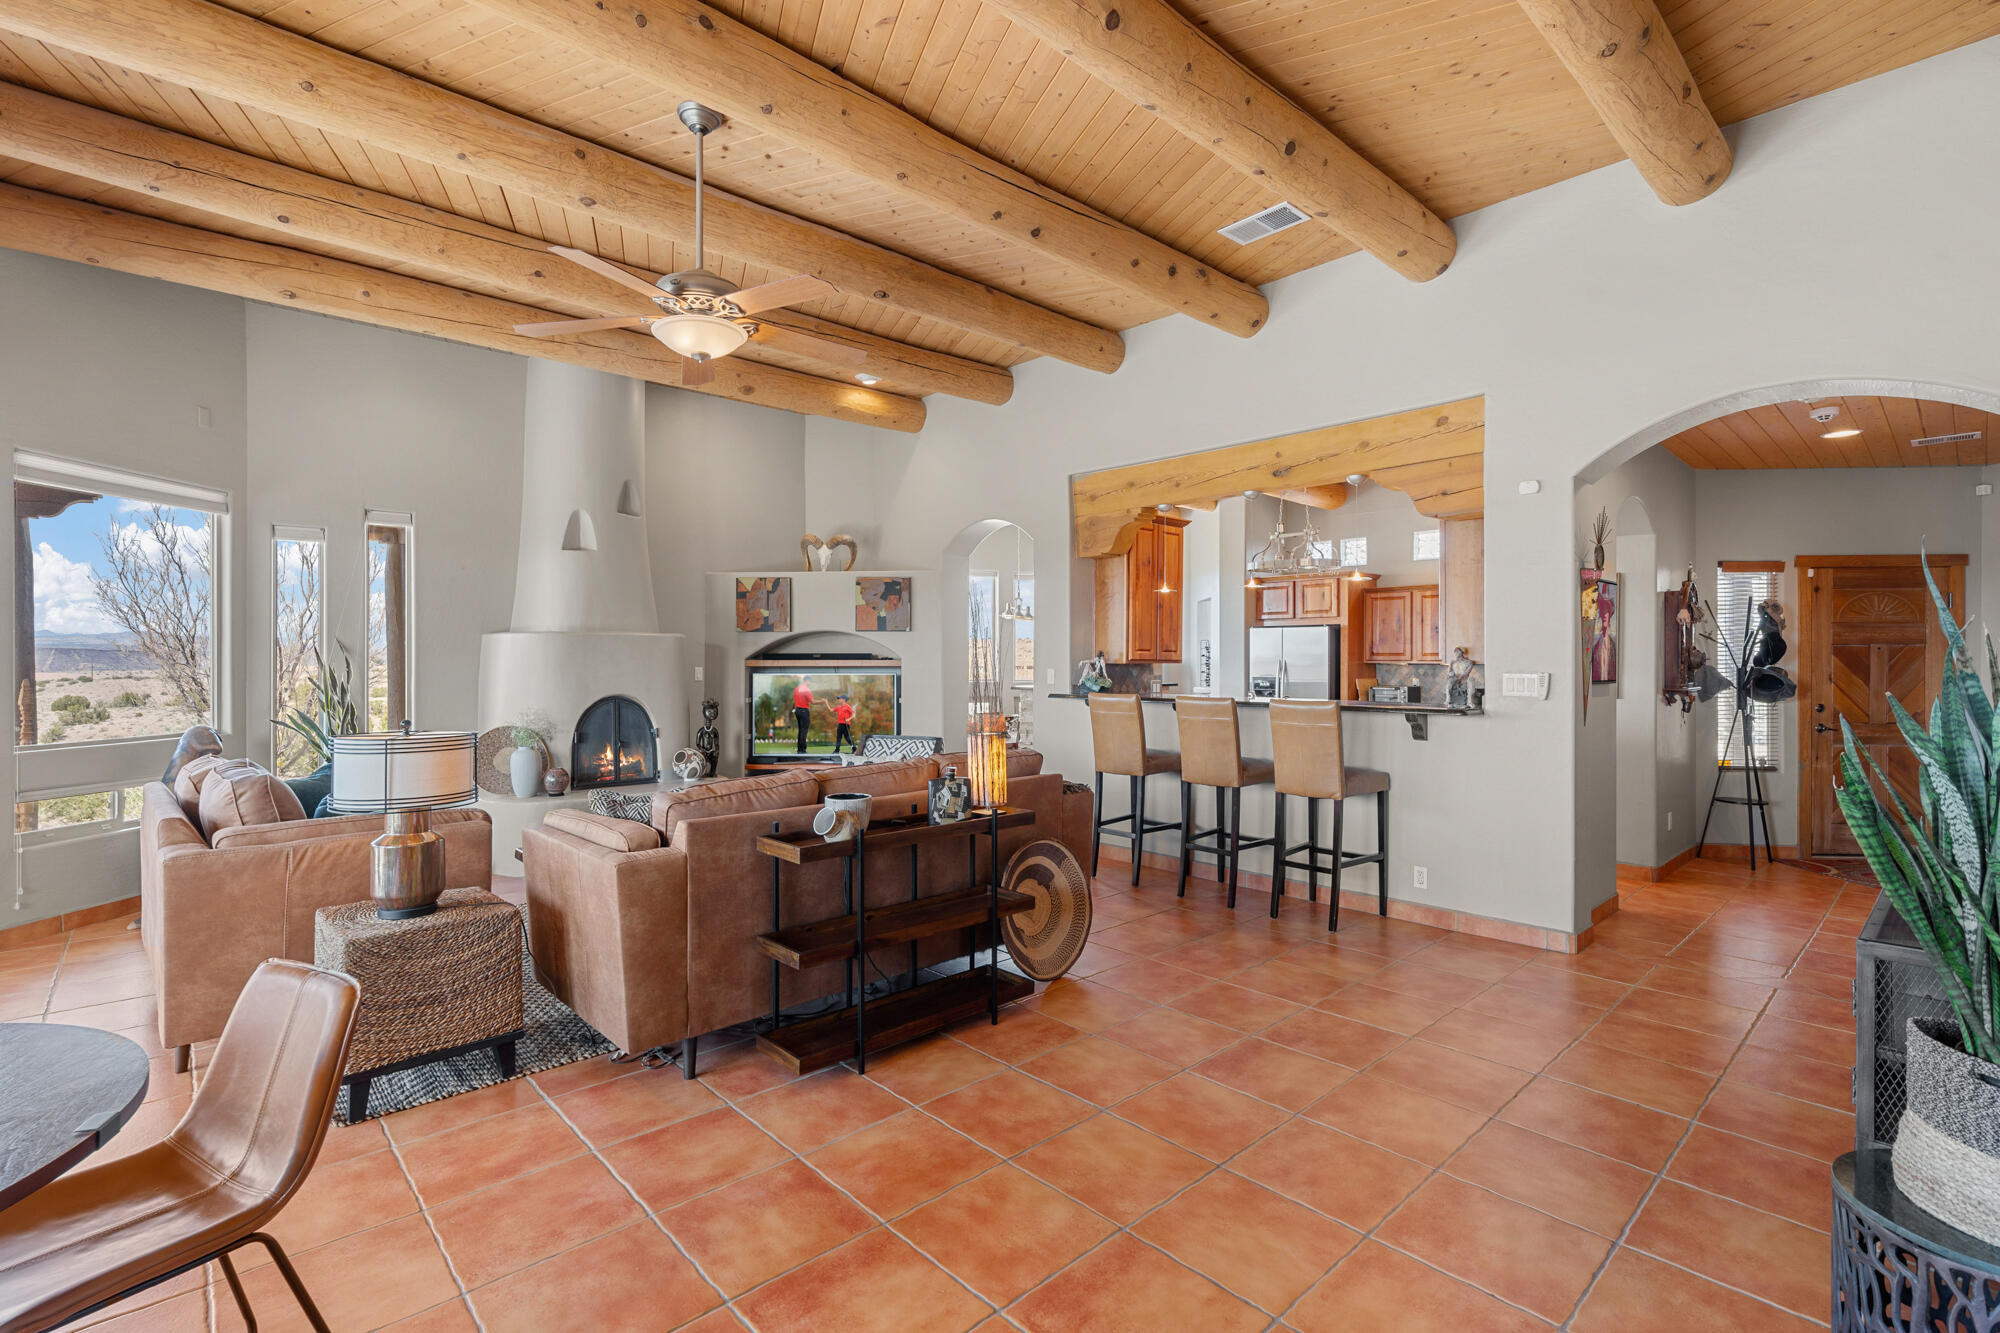 8 Sunset Mesa Court, Placitas, New Mexico 87043, 3 Bedrooms Bedrooms, ,2 BathroomsBathrooms,Residential,For Sale,8 Sunset Mesa Court,1061200